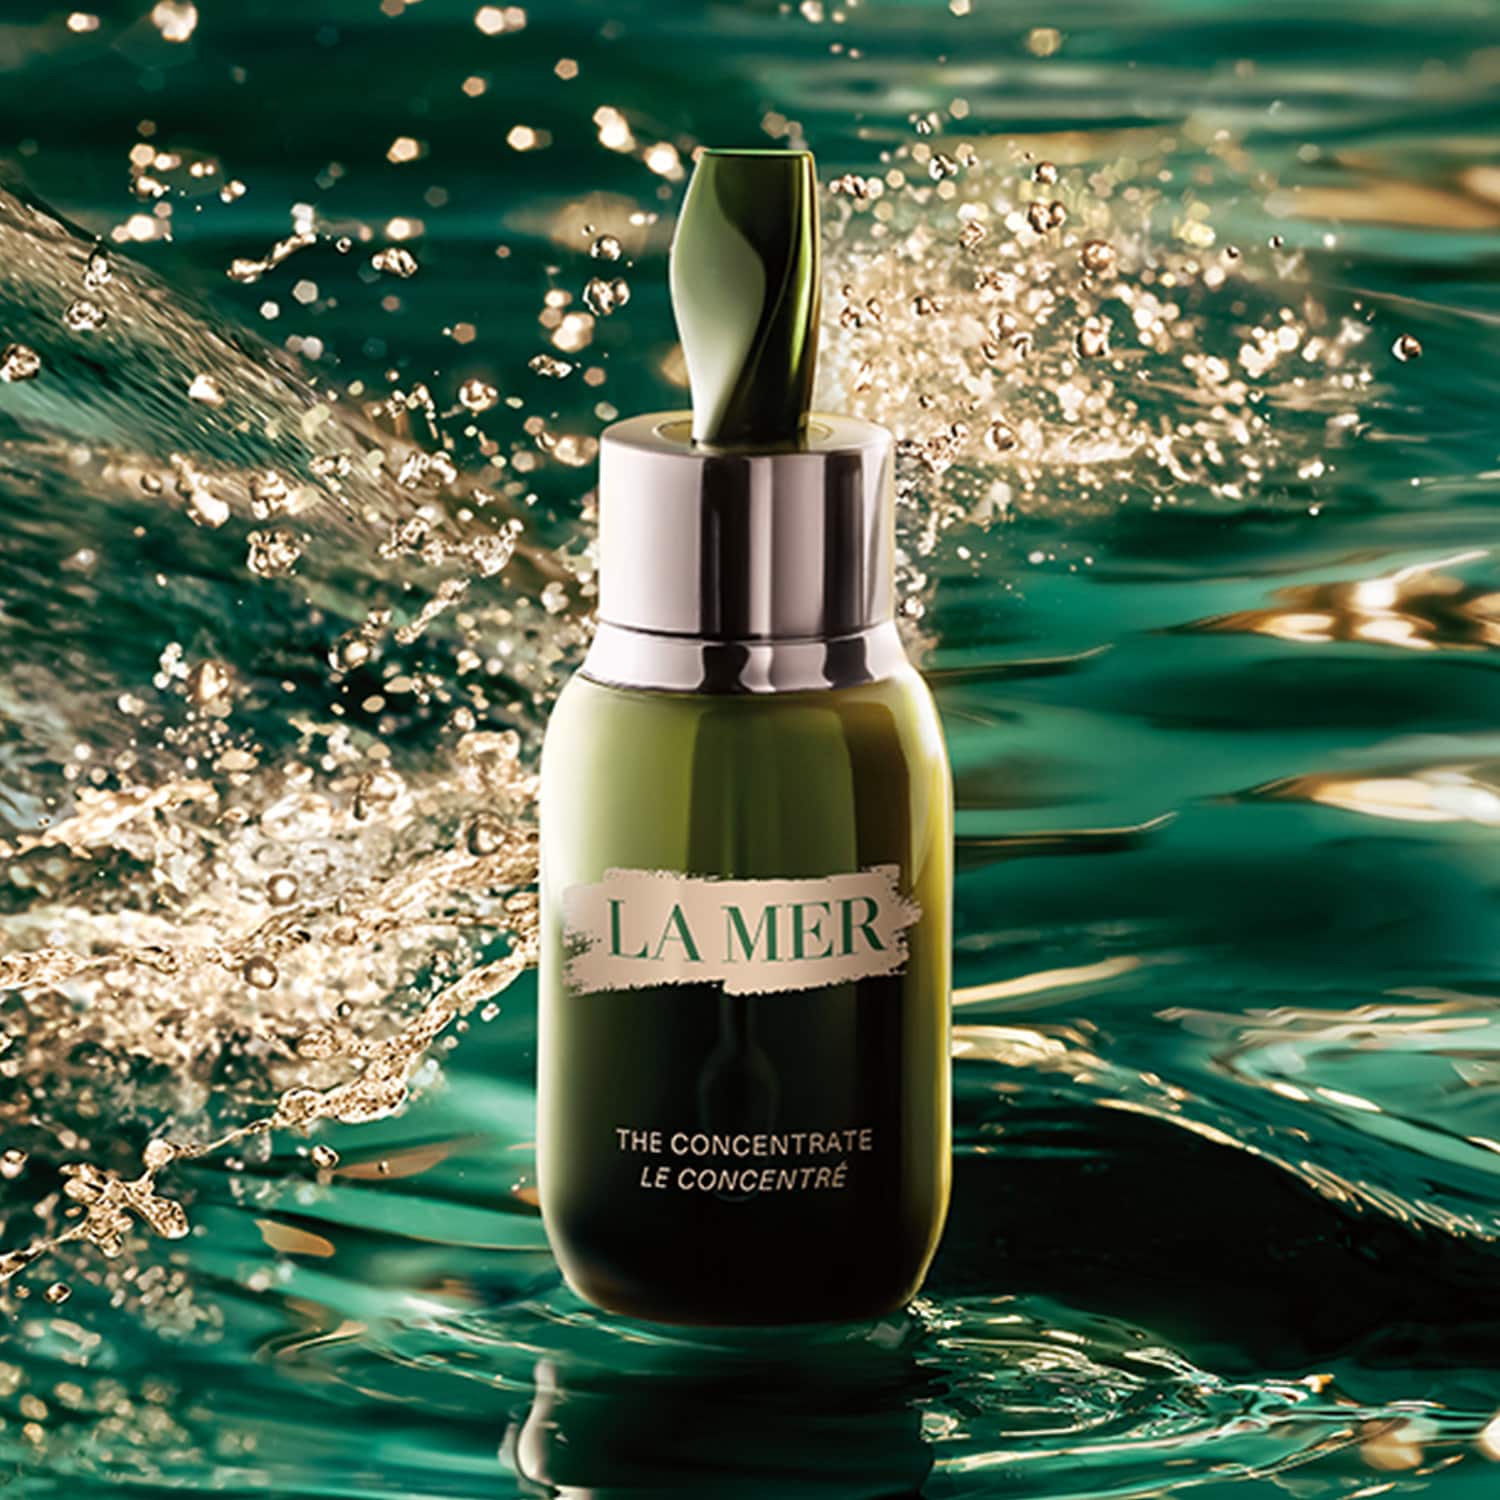 La Mer’s Powerful Ointment: The Concentrate